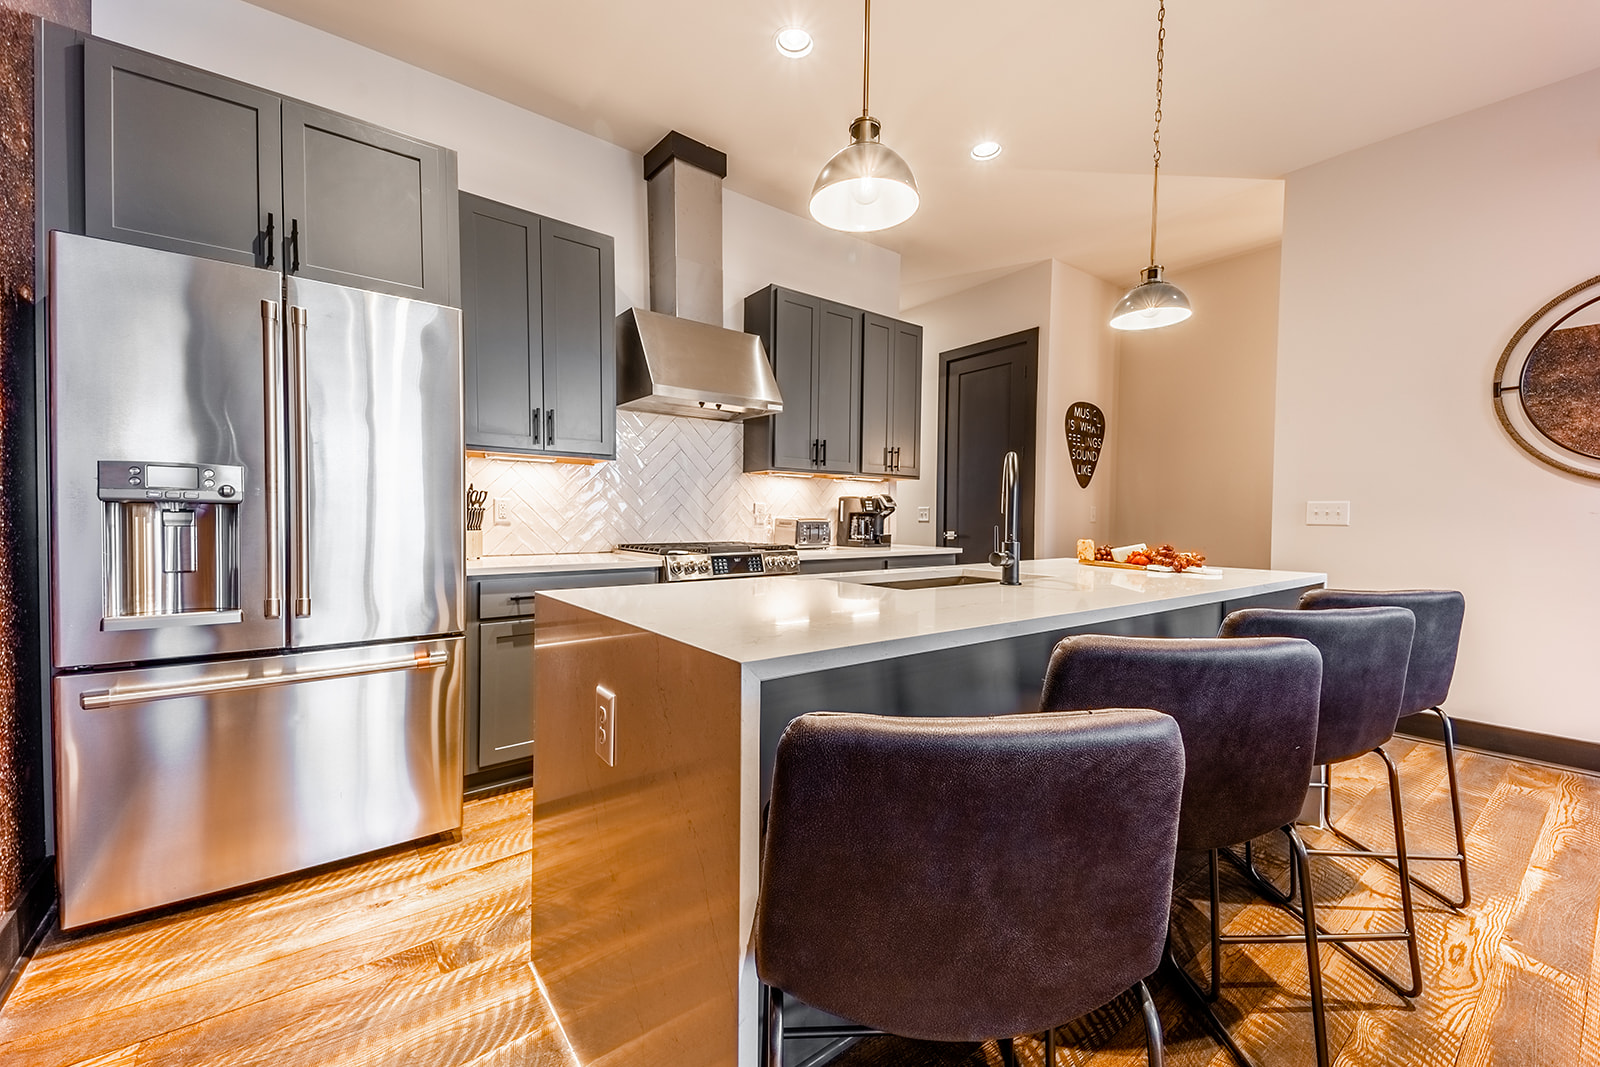 Unit 2: Fully equipped kitchen with stainless steel appliances and breakfast bar seating complete with bar stools.